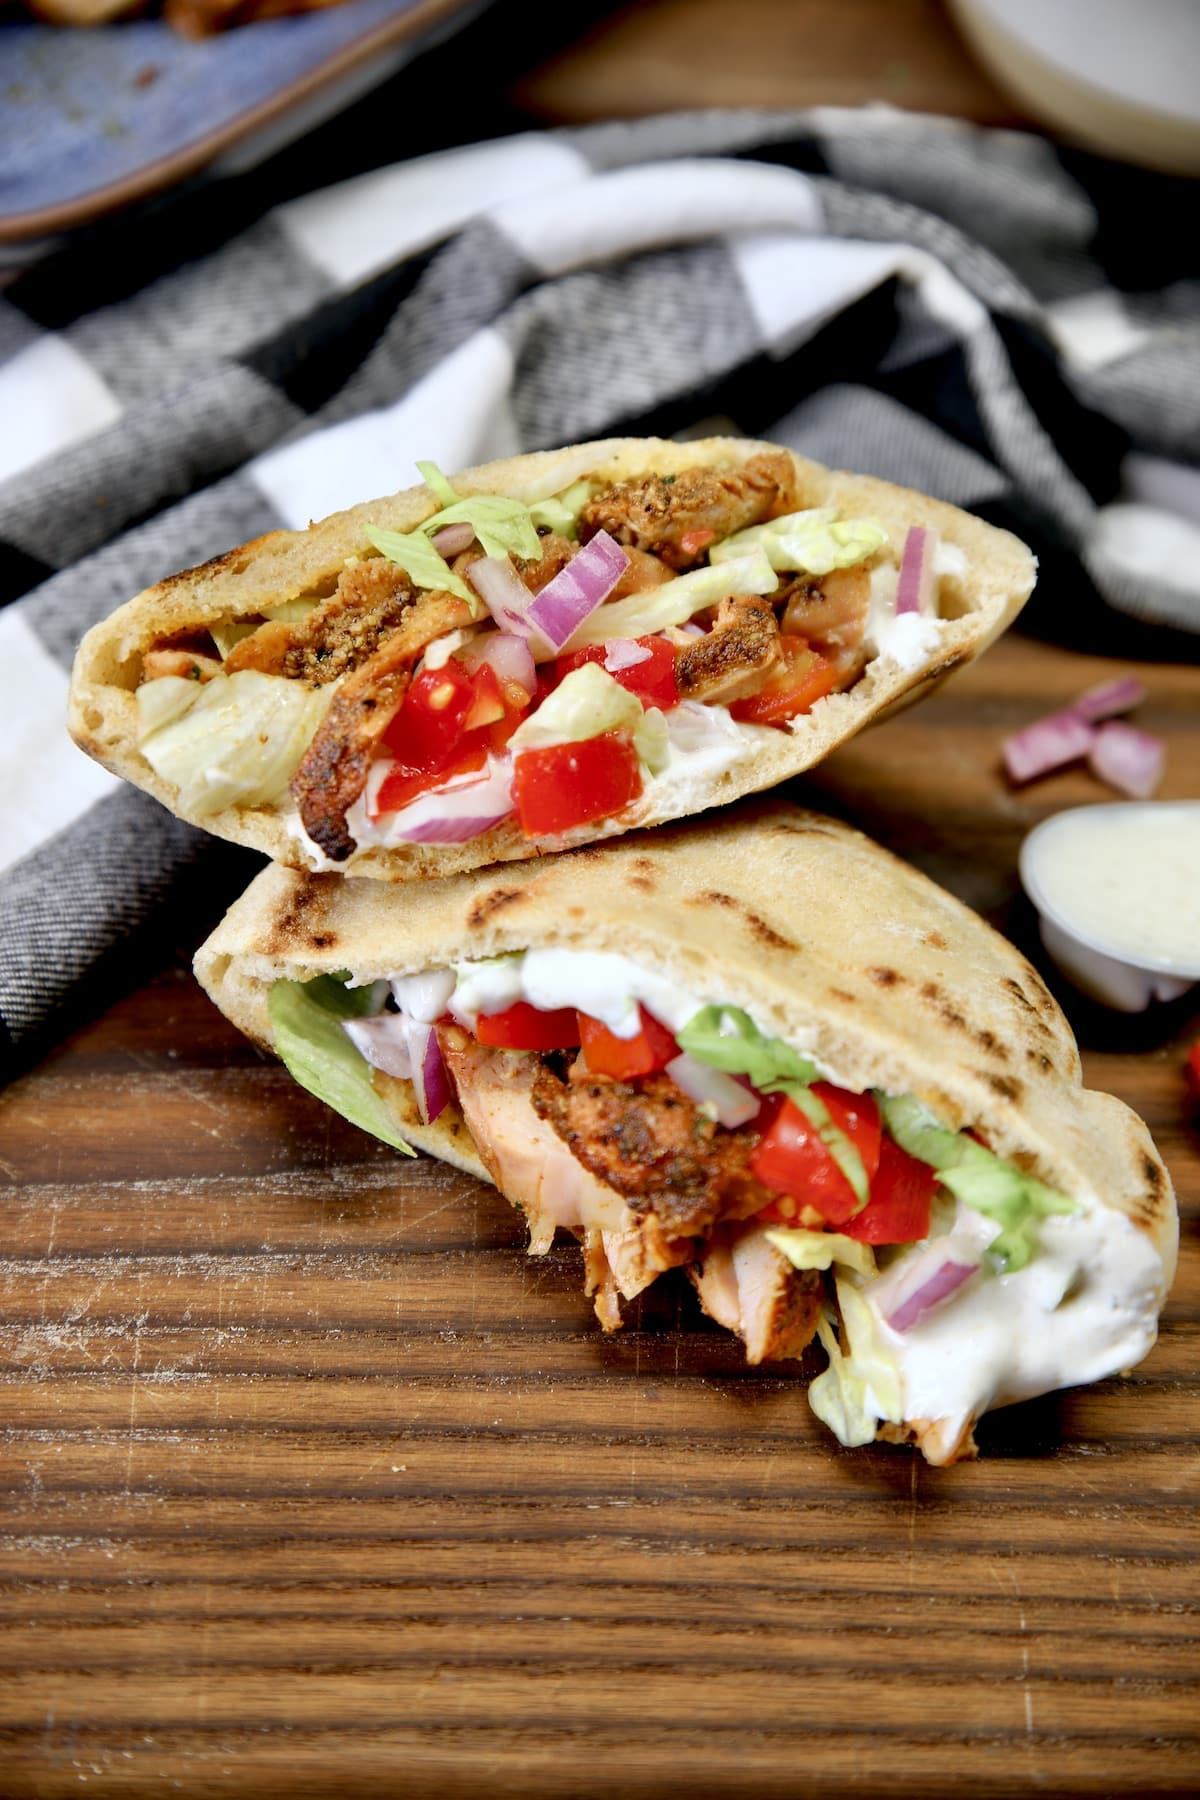 Chicken shawarma pita sandwich with tomatoes, cucumbers and red onion.